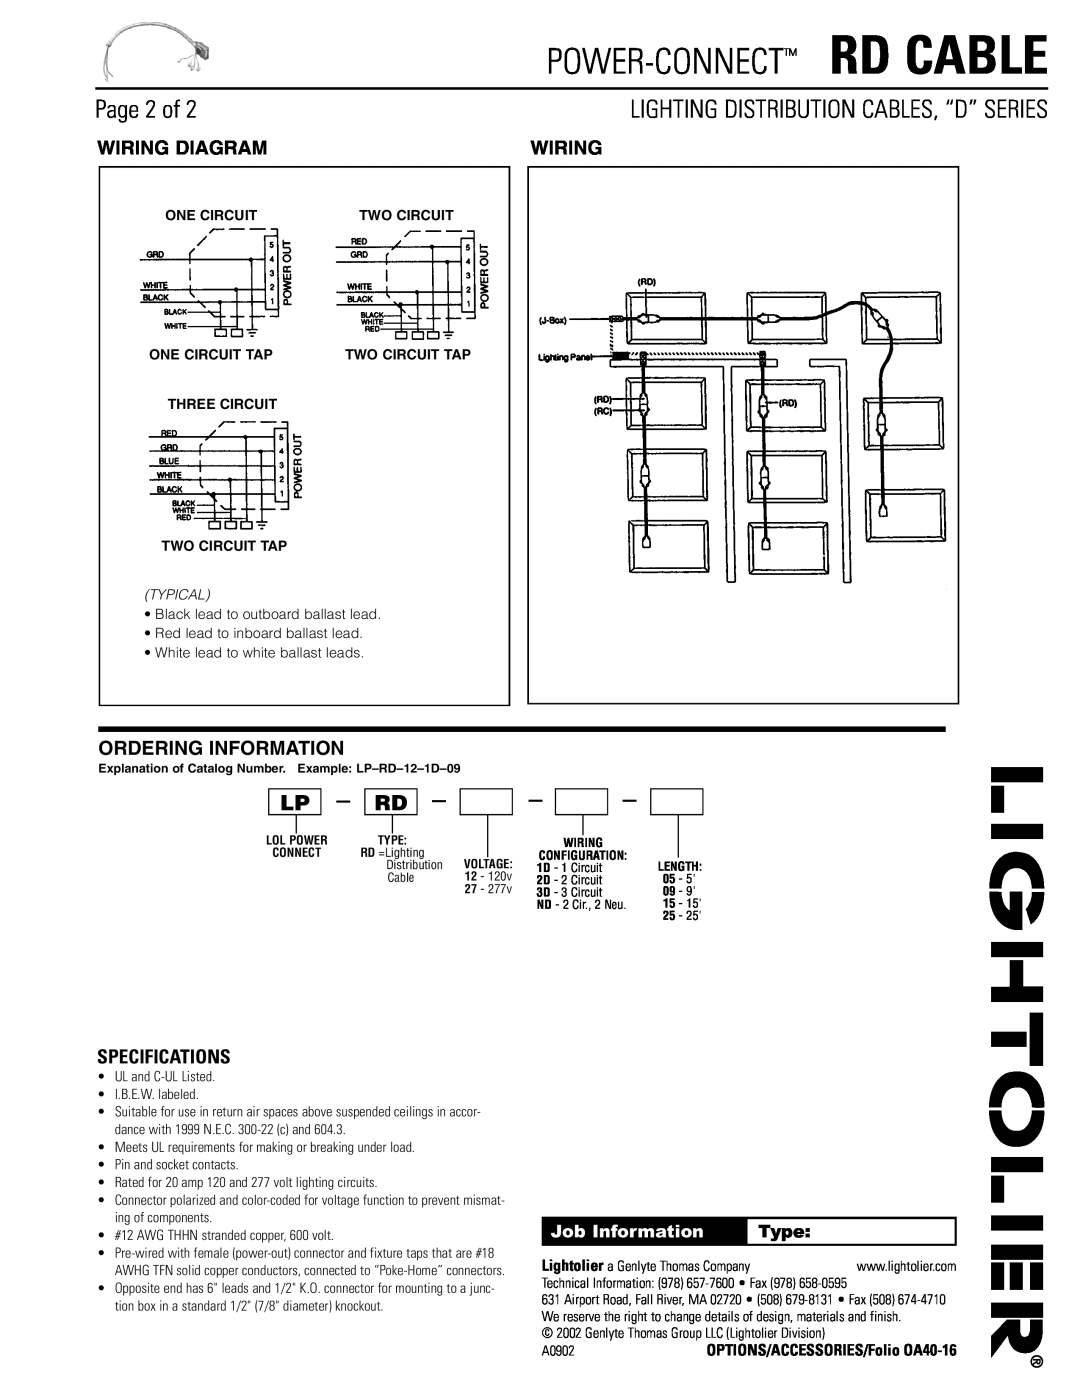 Lightolier RD Cable Page 2 of, Specifications, Power-Connect Rd Cable, Lighting Distribution Cables, “D” Series, Wiring 